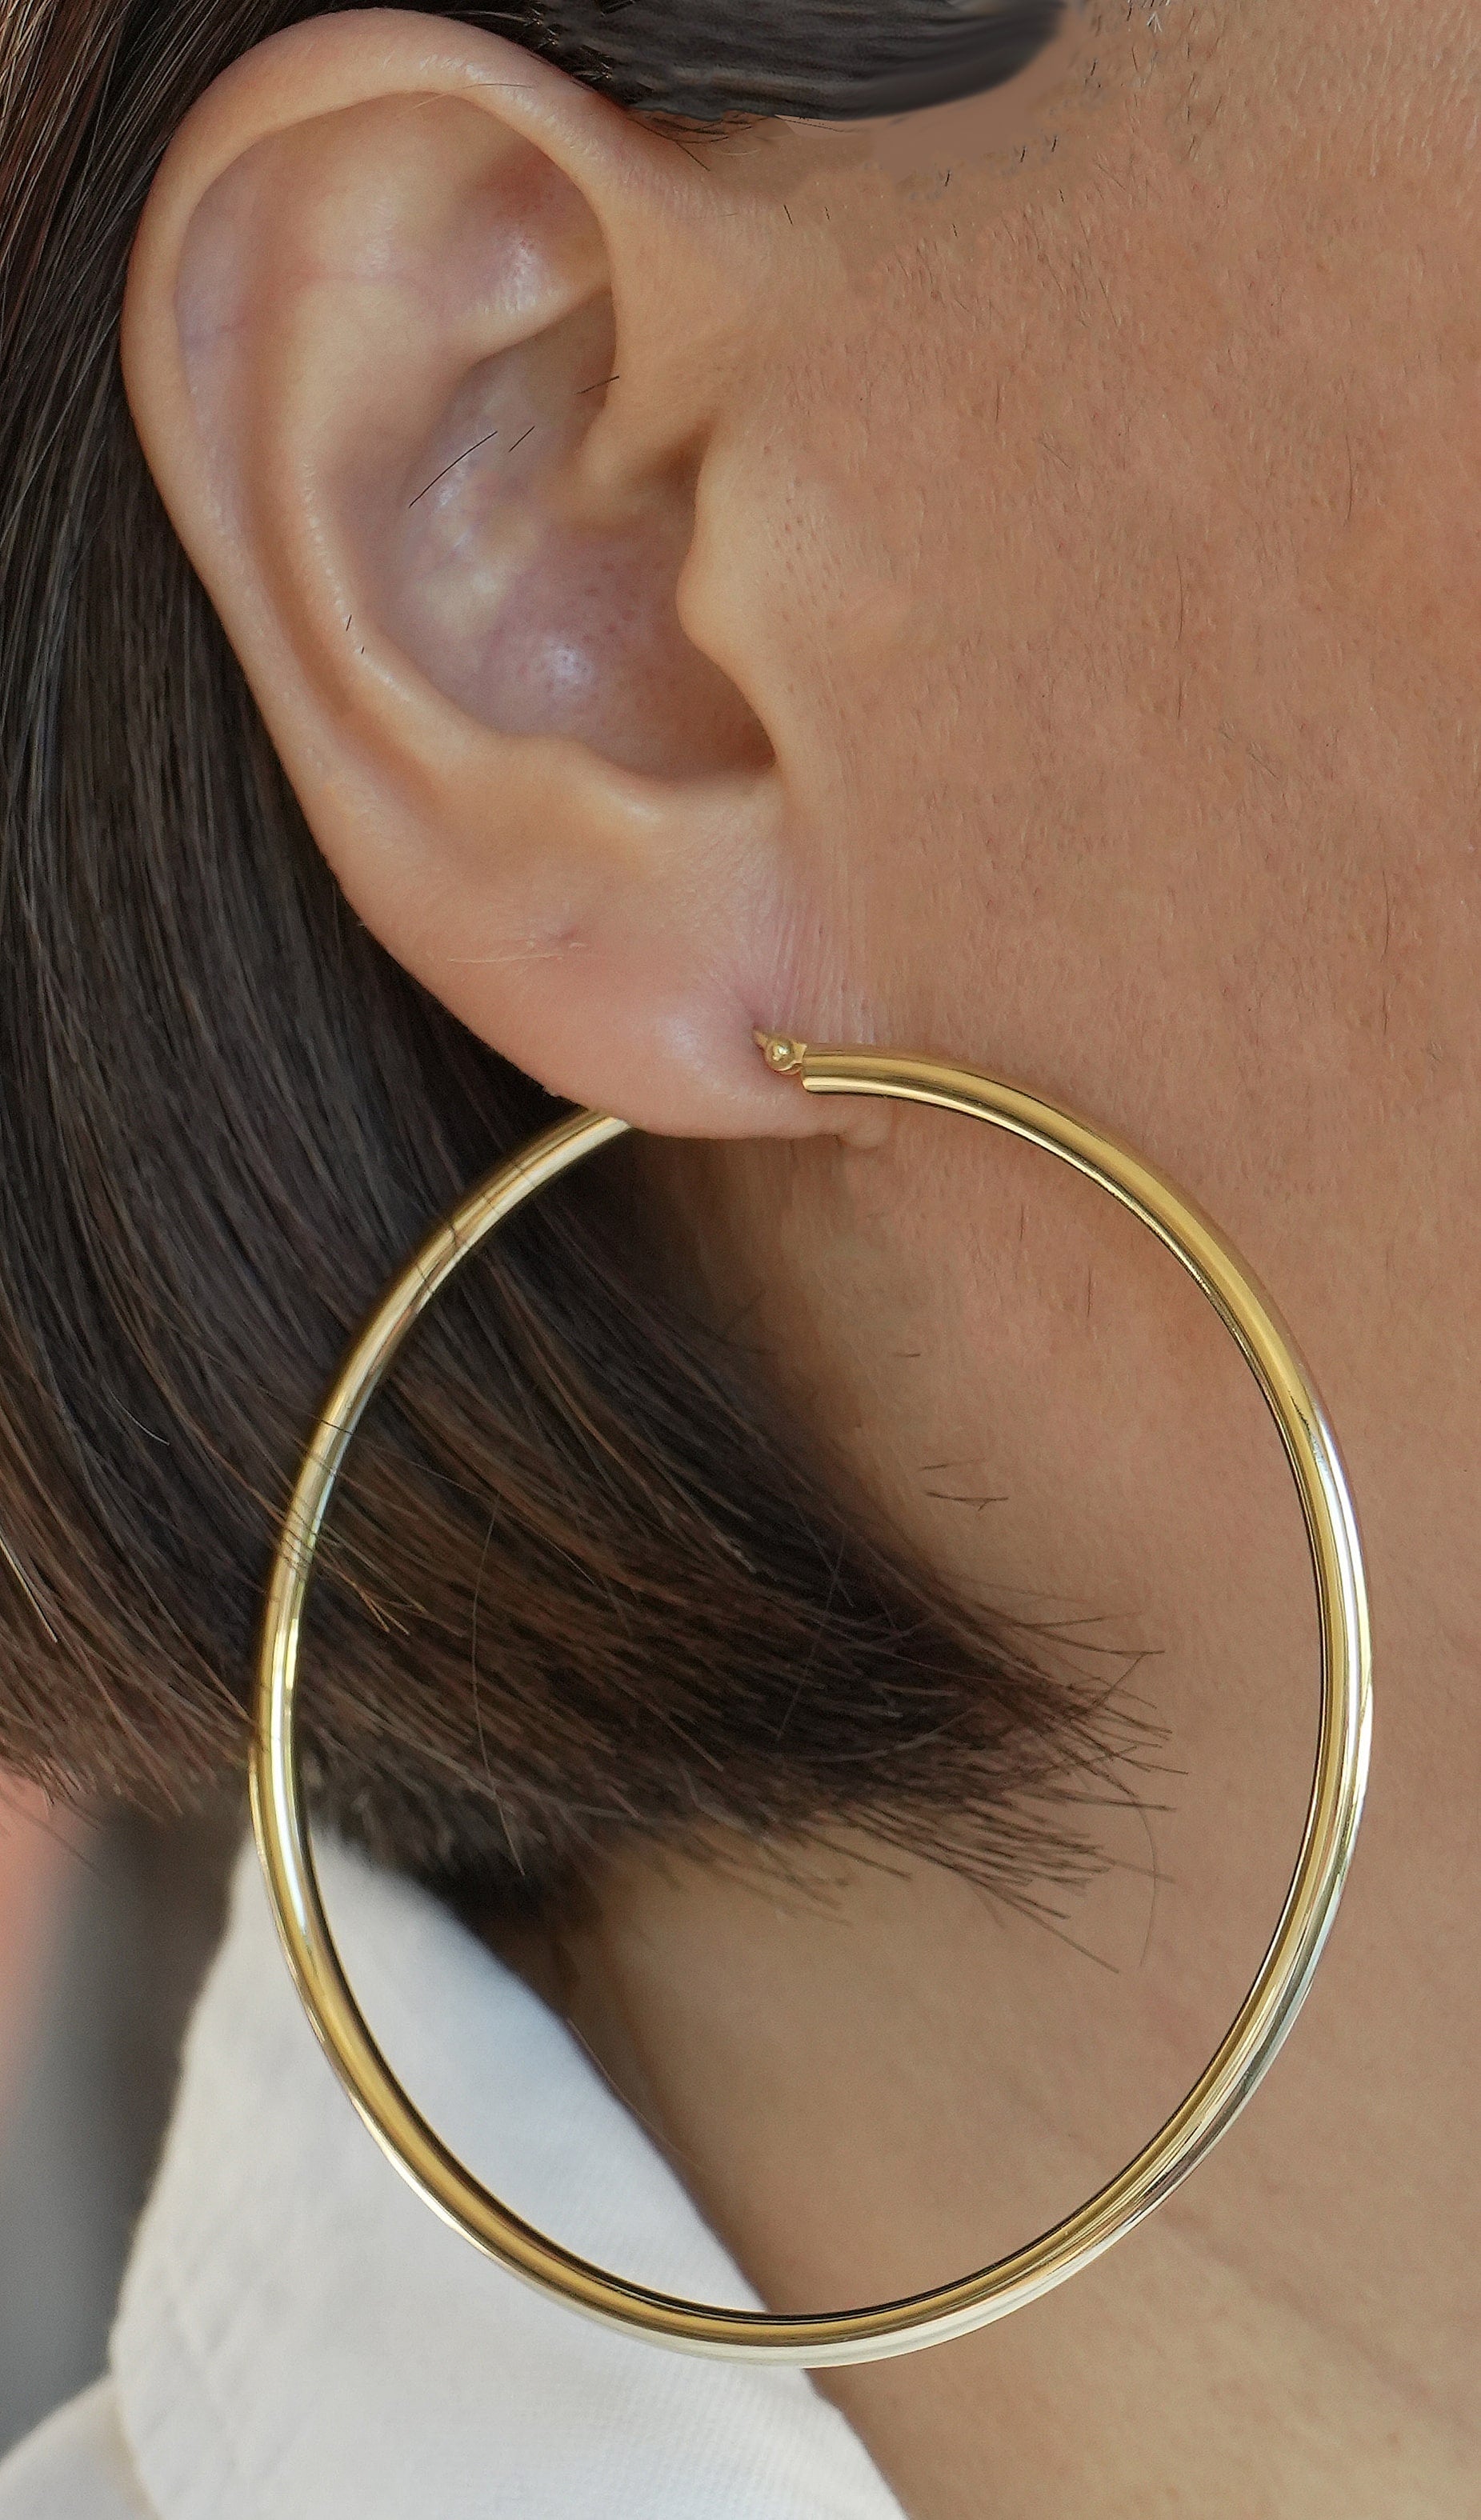 14K Yellow Gold 69mm x 3mm Extra Large Round Classic Hoop Earrings Lightweight